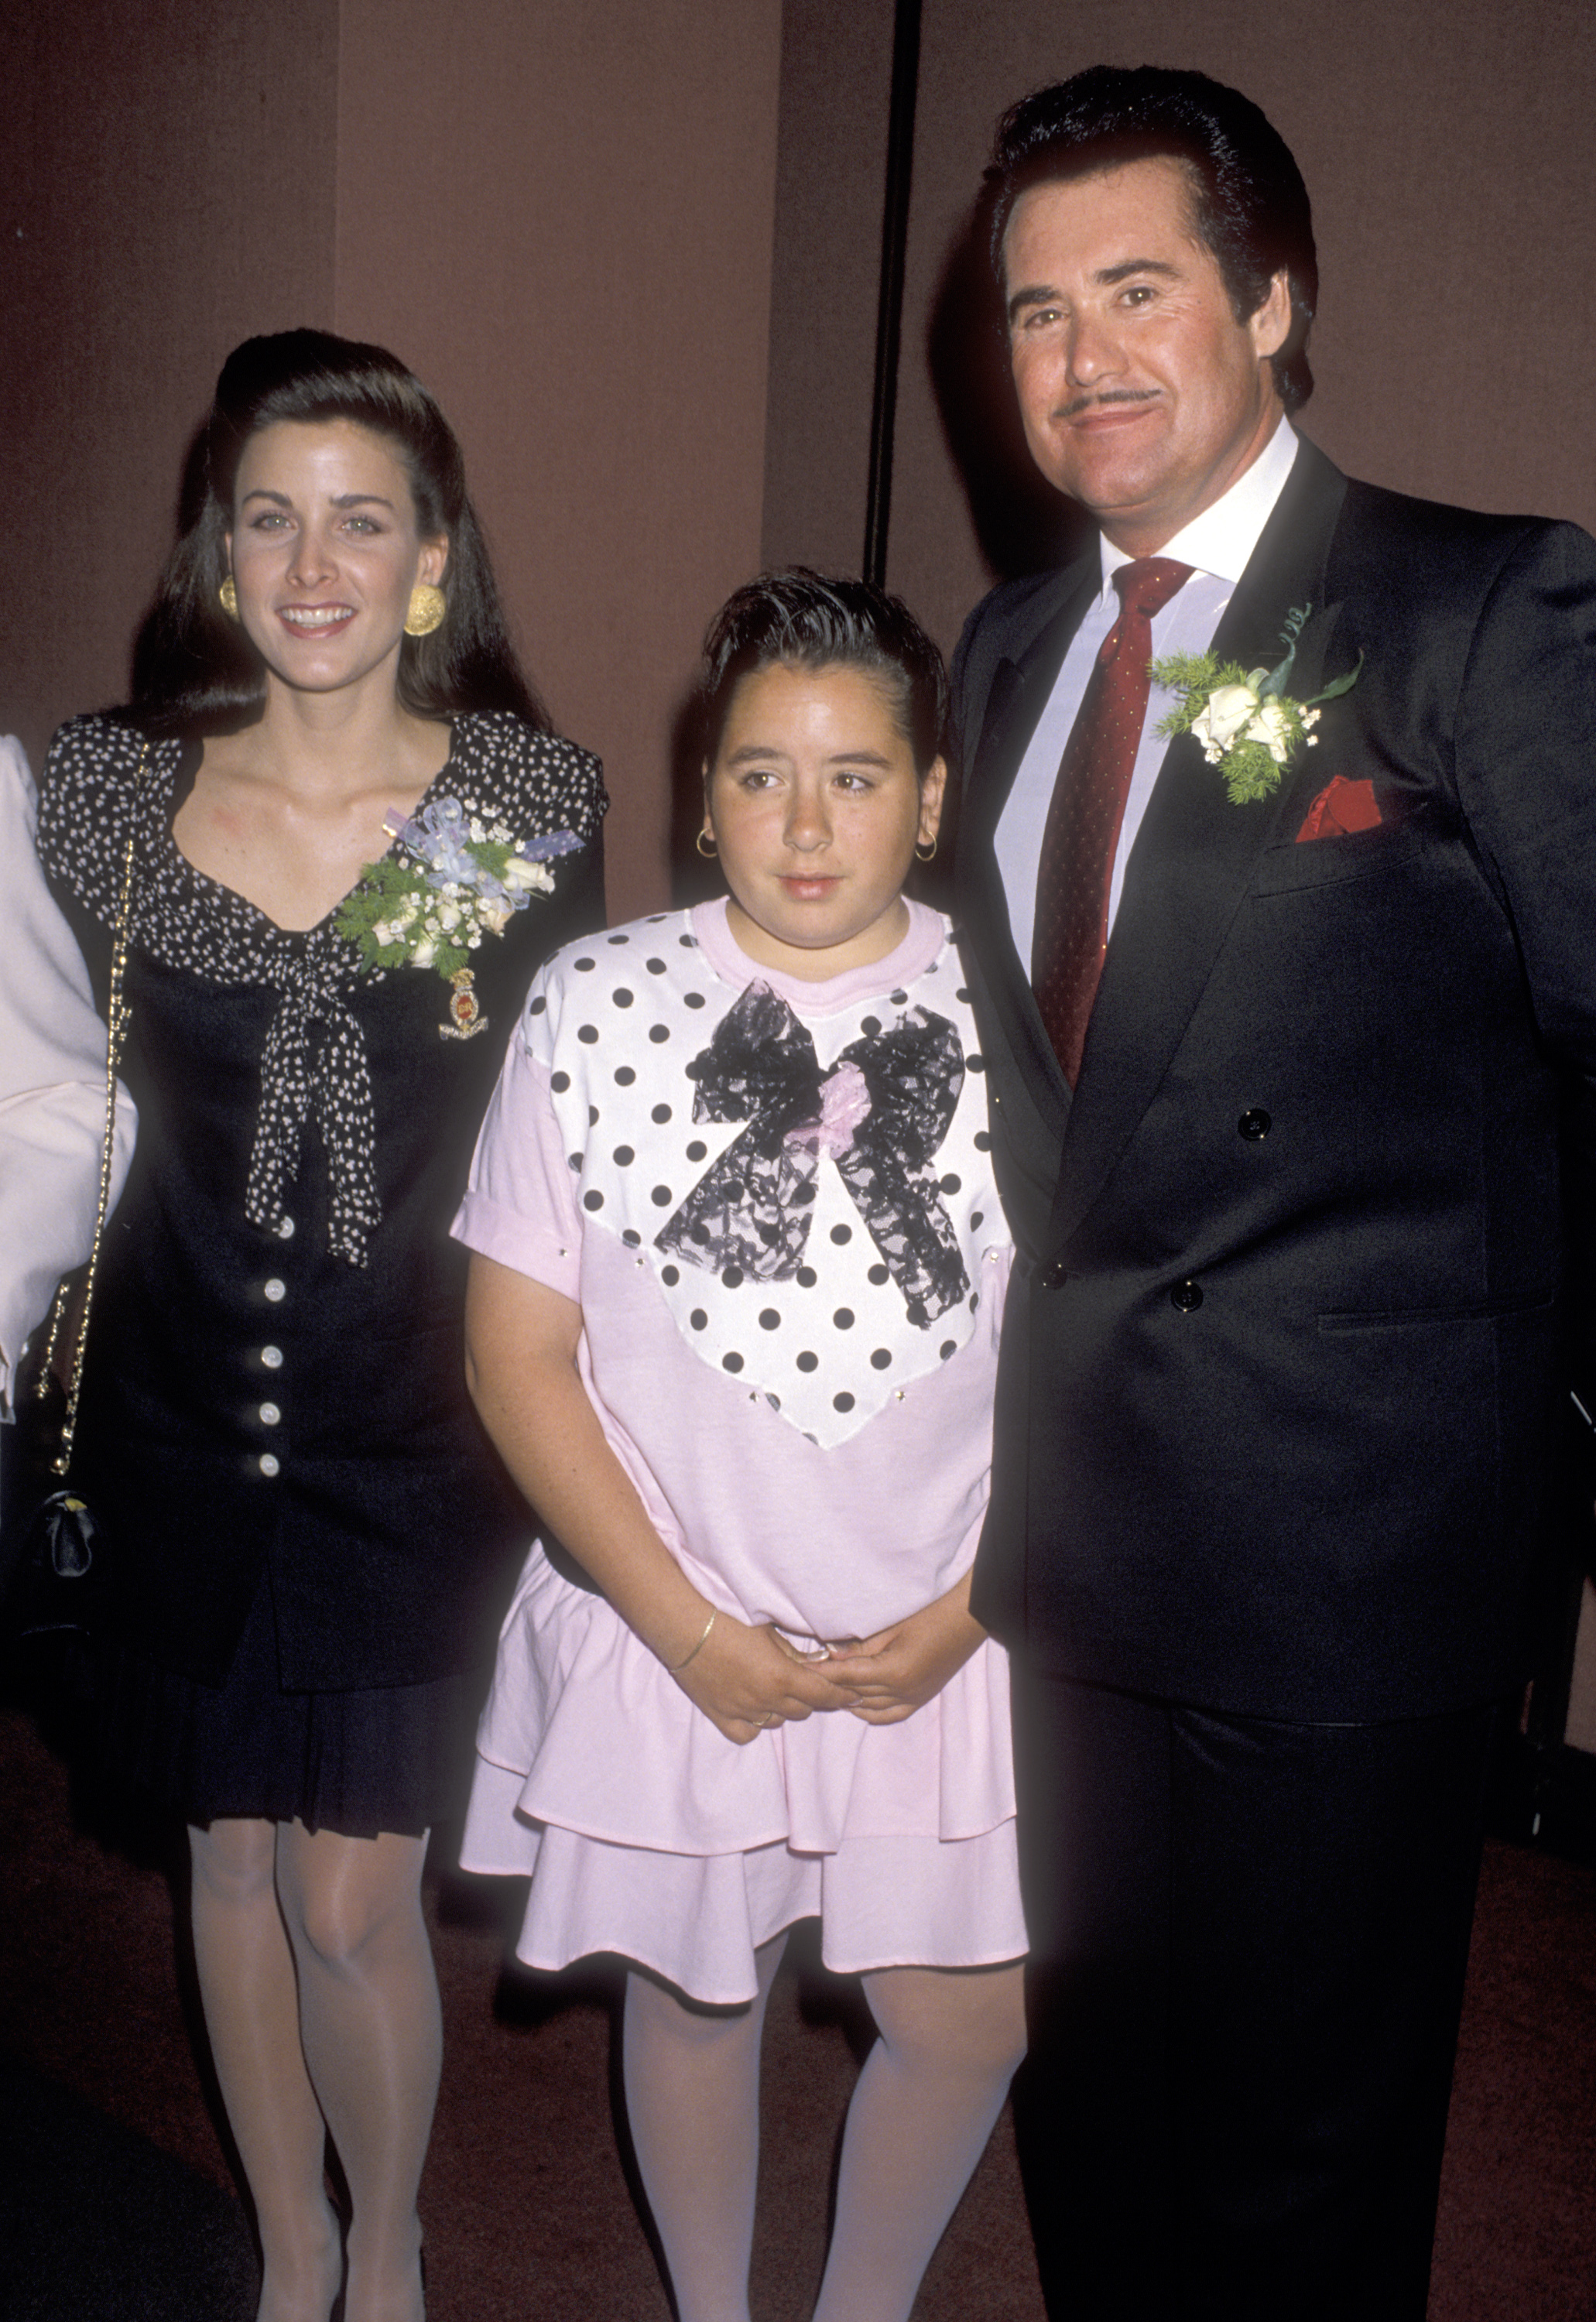 Marla Heasley, Wayne Newton, and his daughter Erin Newton at the West Coast Father's Day Council's Fathers of the Year Awards Luncheon on June 6, 1989, in Los Angeles, California | Source: Getty Images